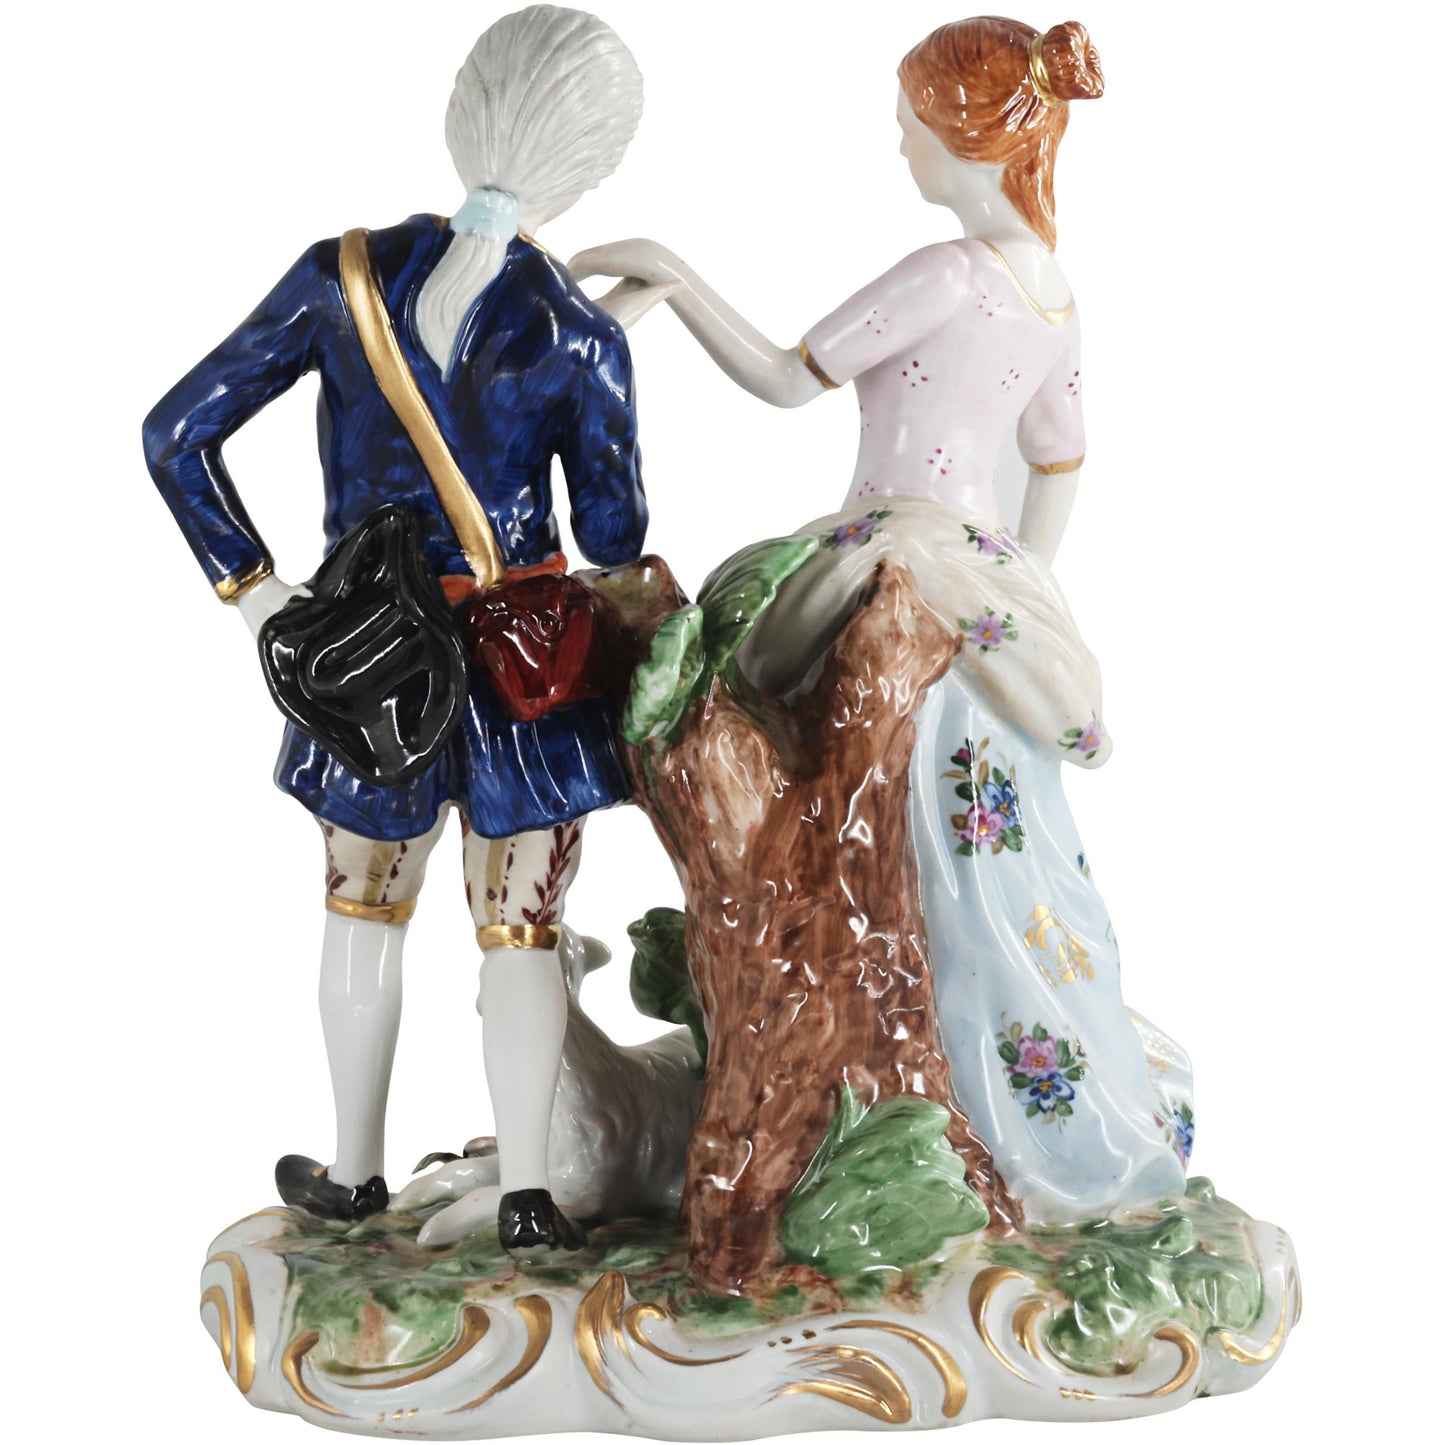 Courtship Hand-painted Porcelain Figurine